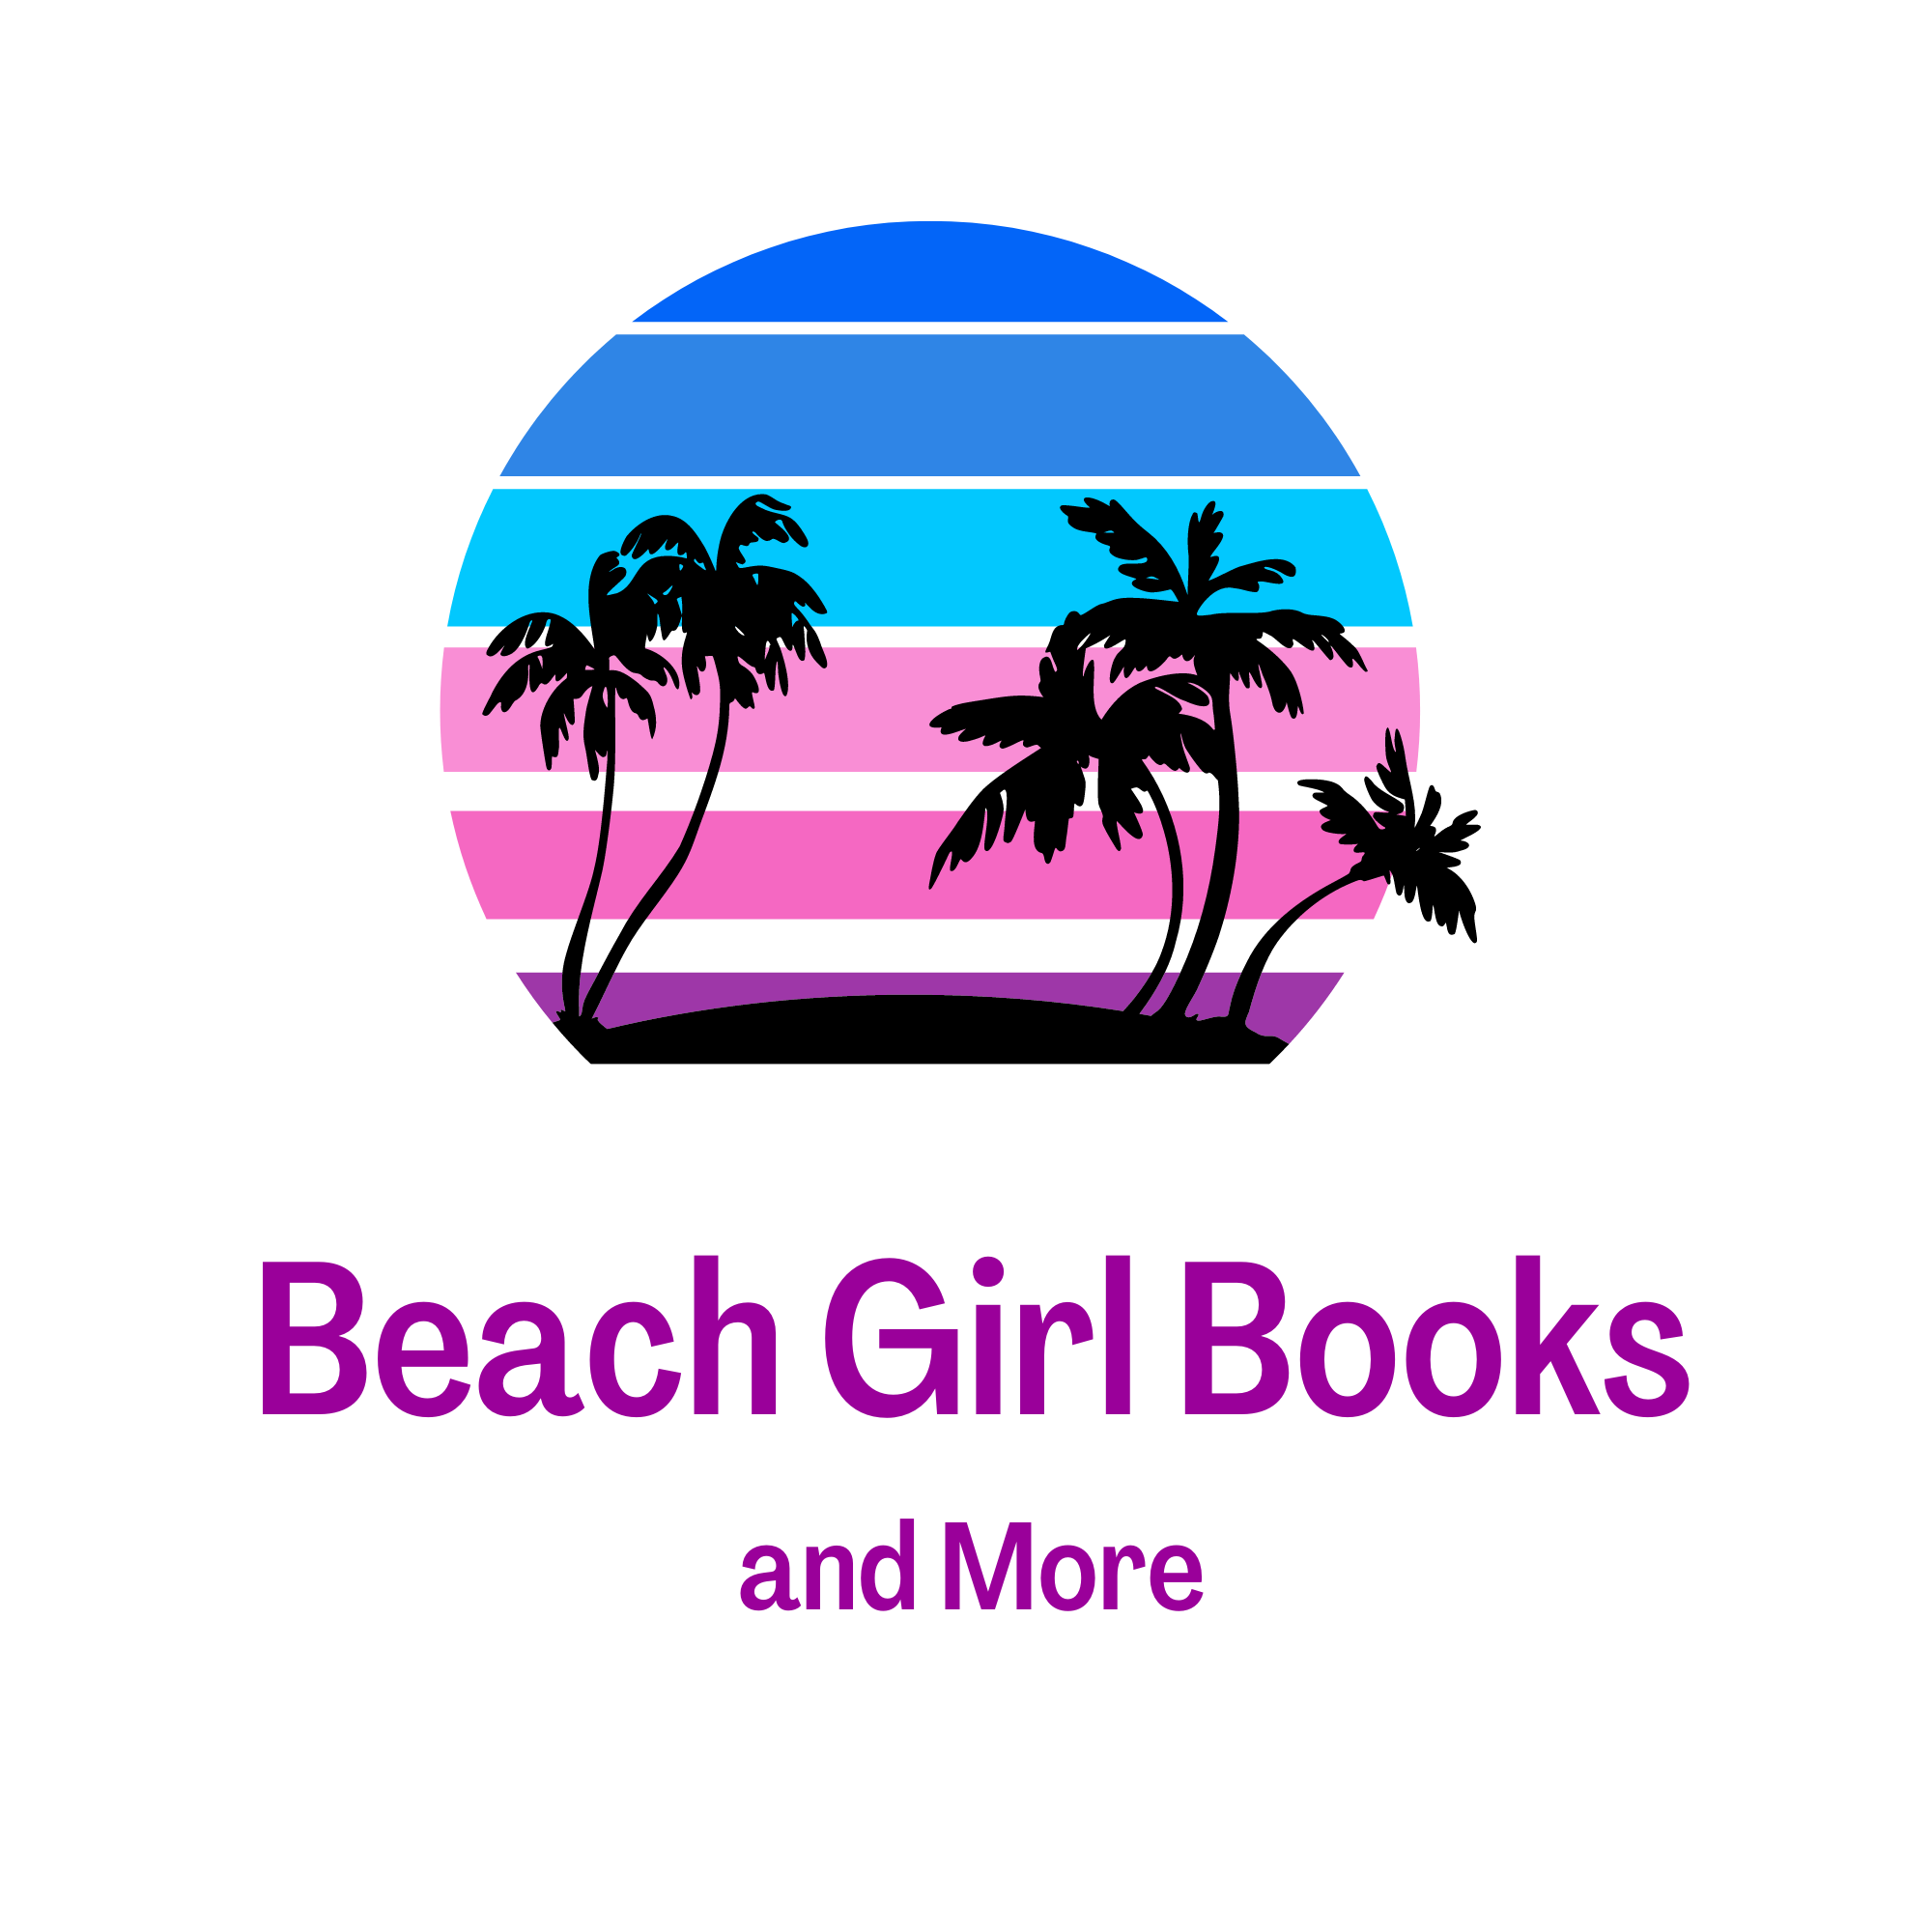 Beach Girl Books and More